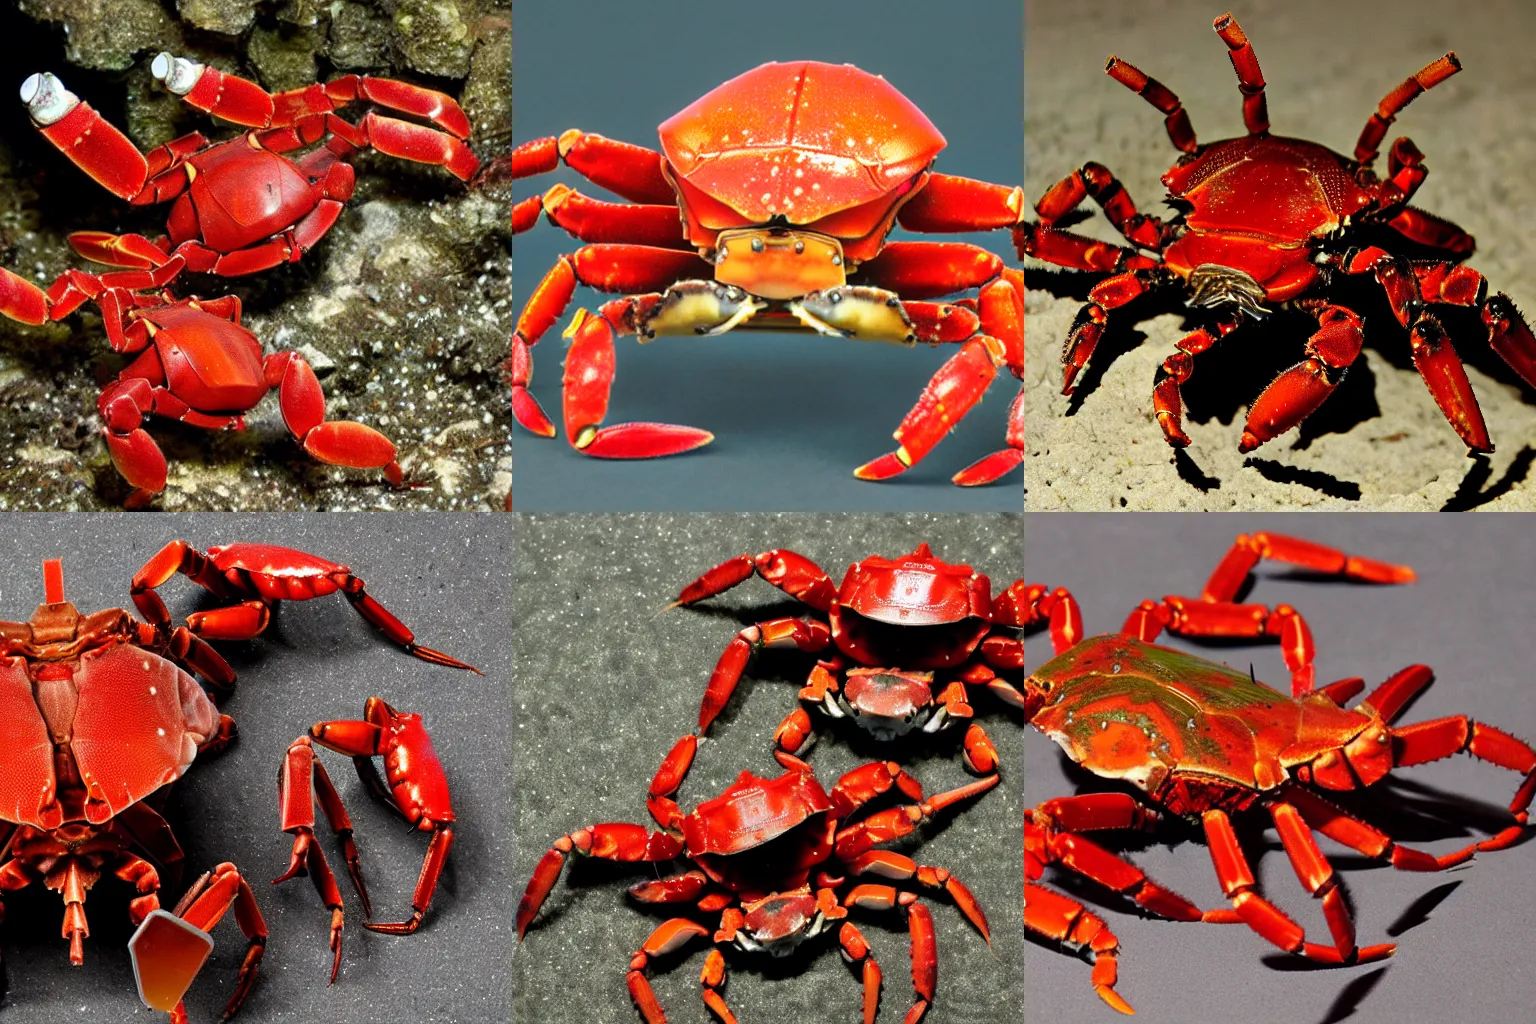 Prompt: Armored crabs with mini guns, photo